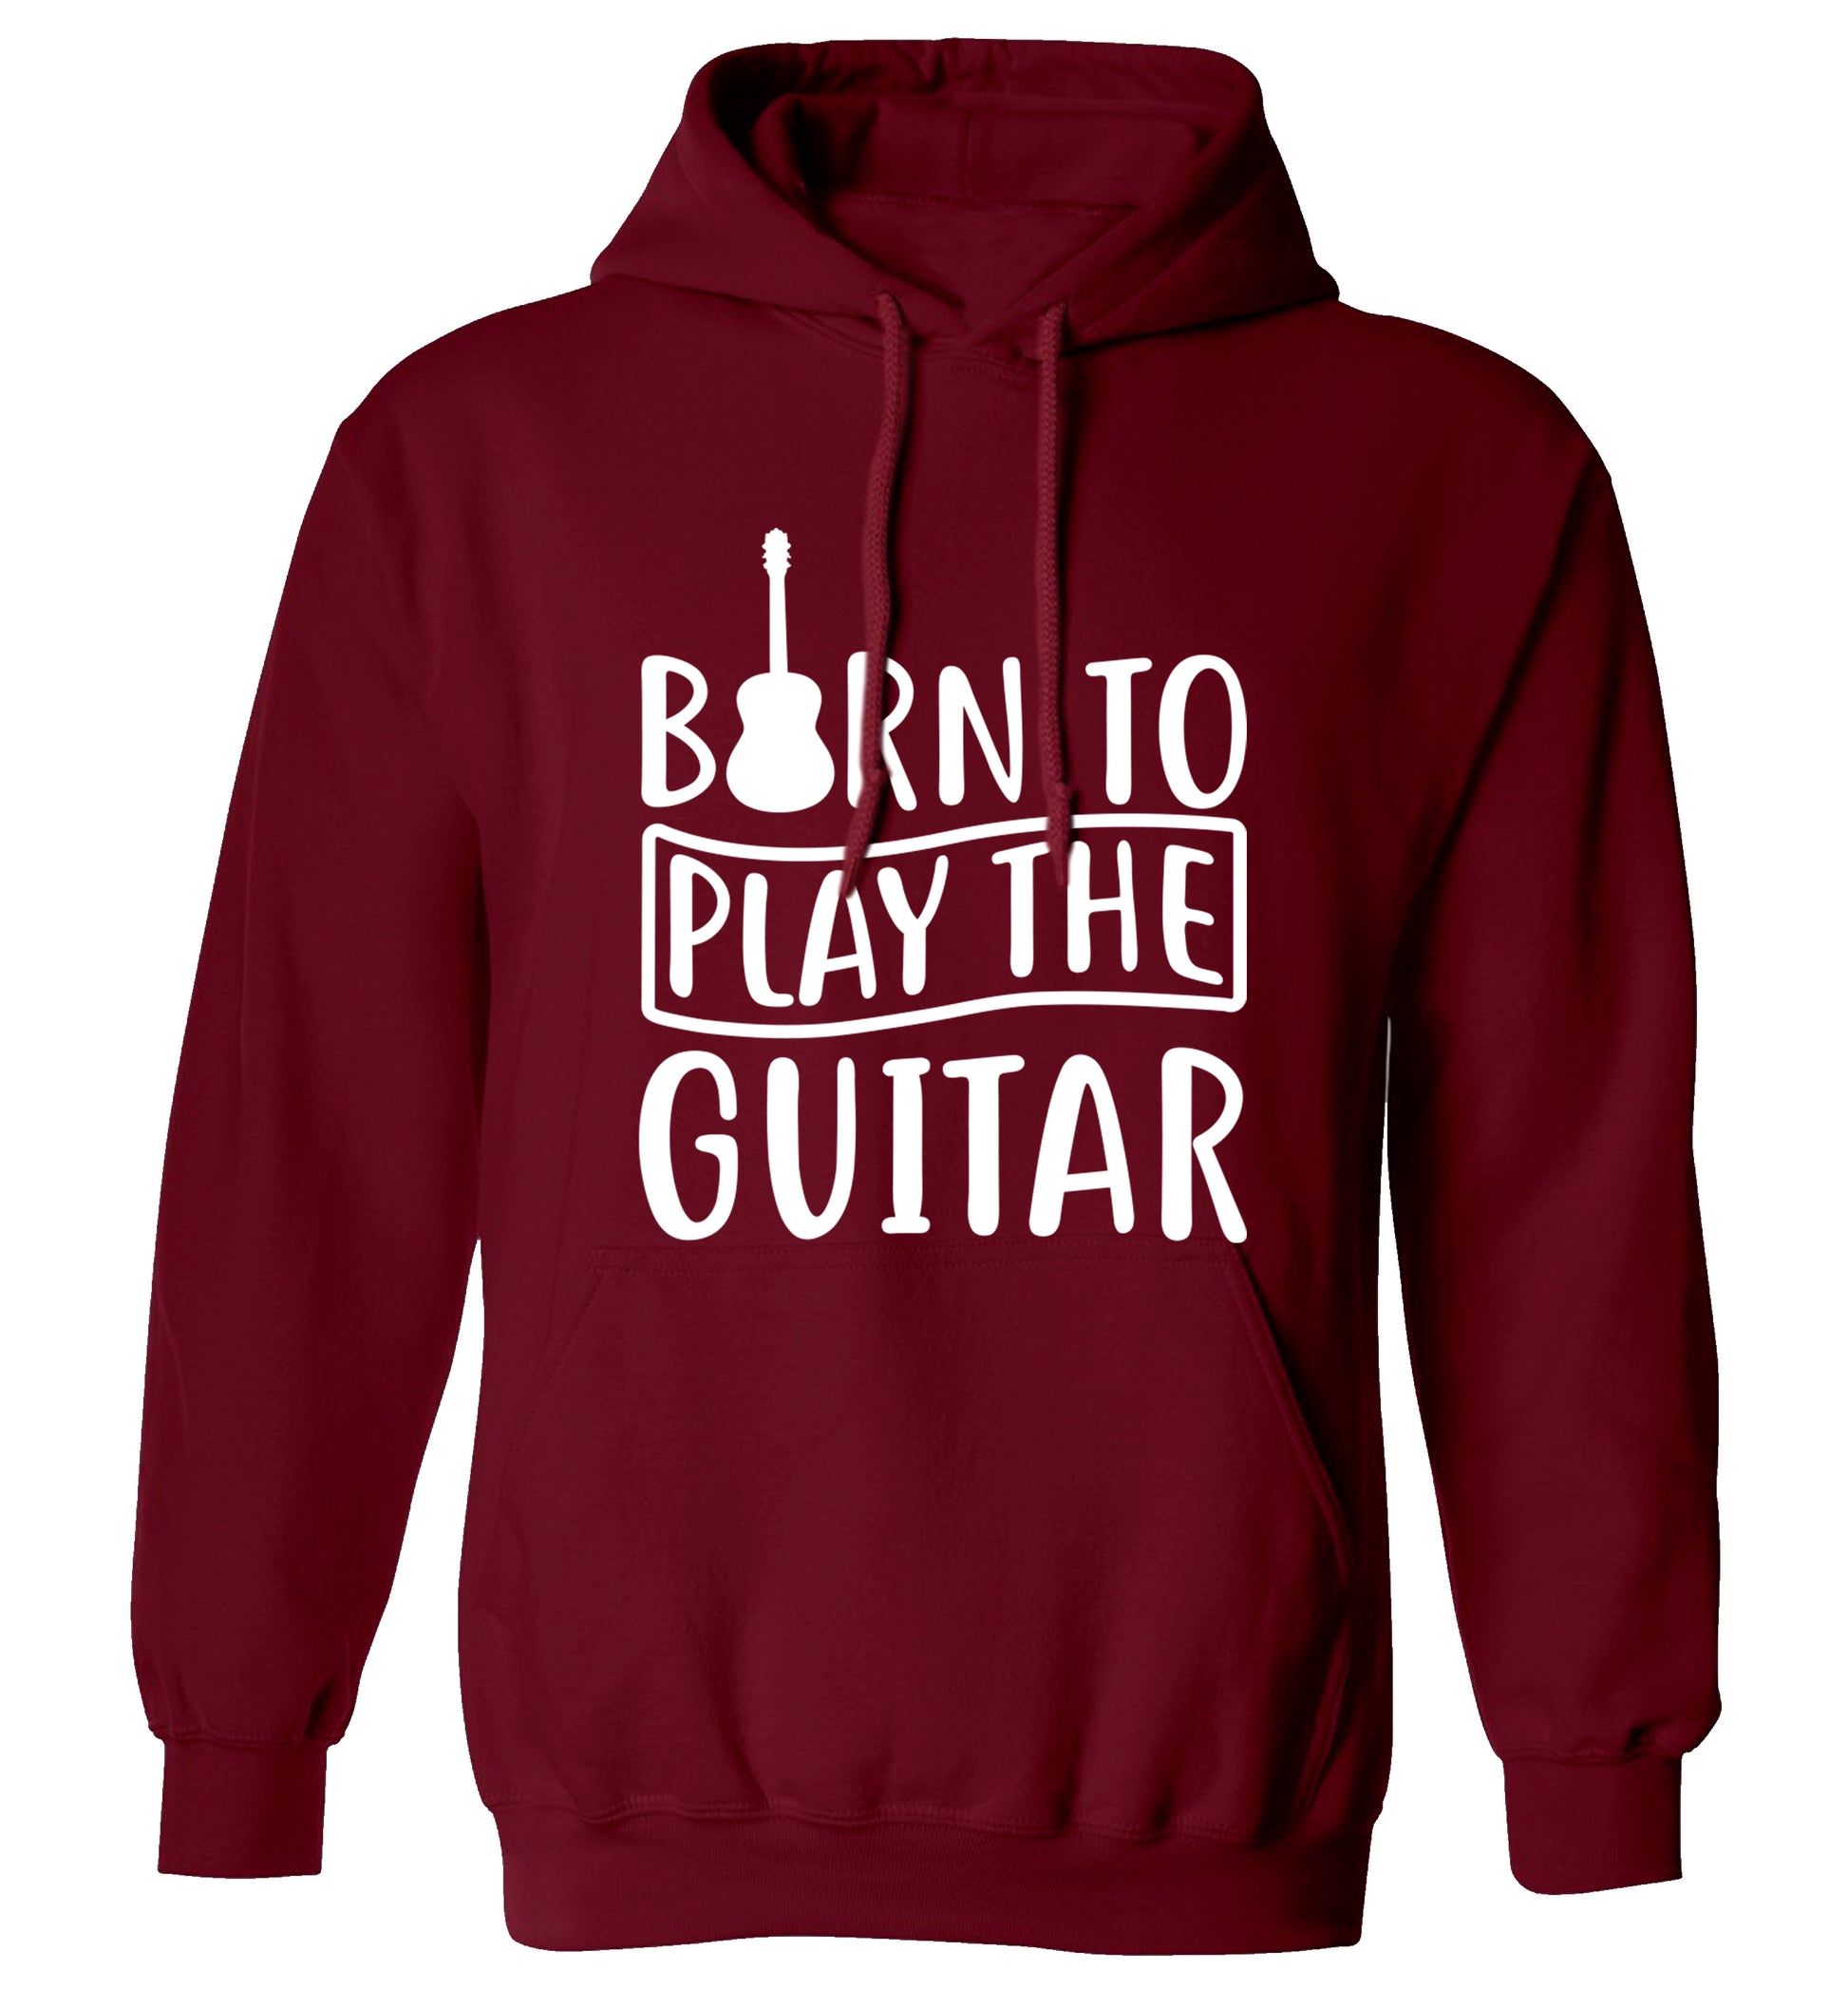 Born to play the guitar adults unisex maroon hoodie 2XL